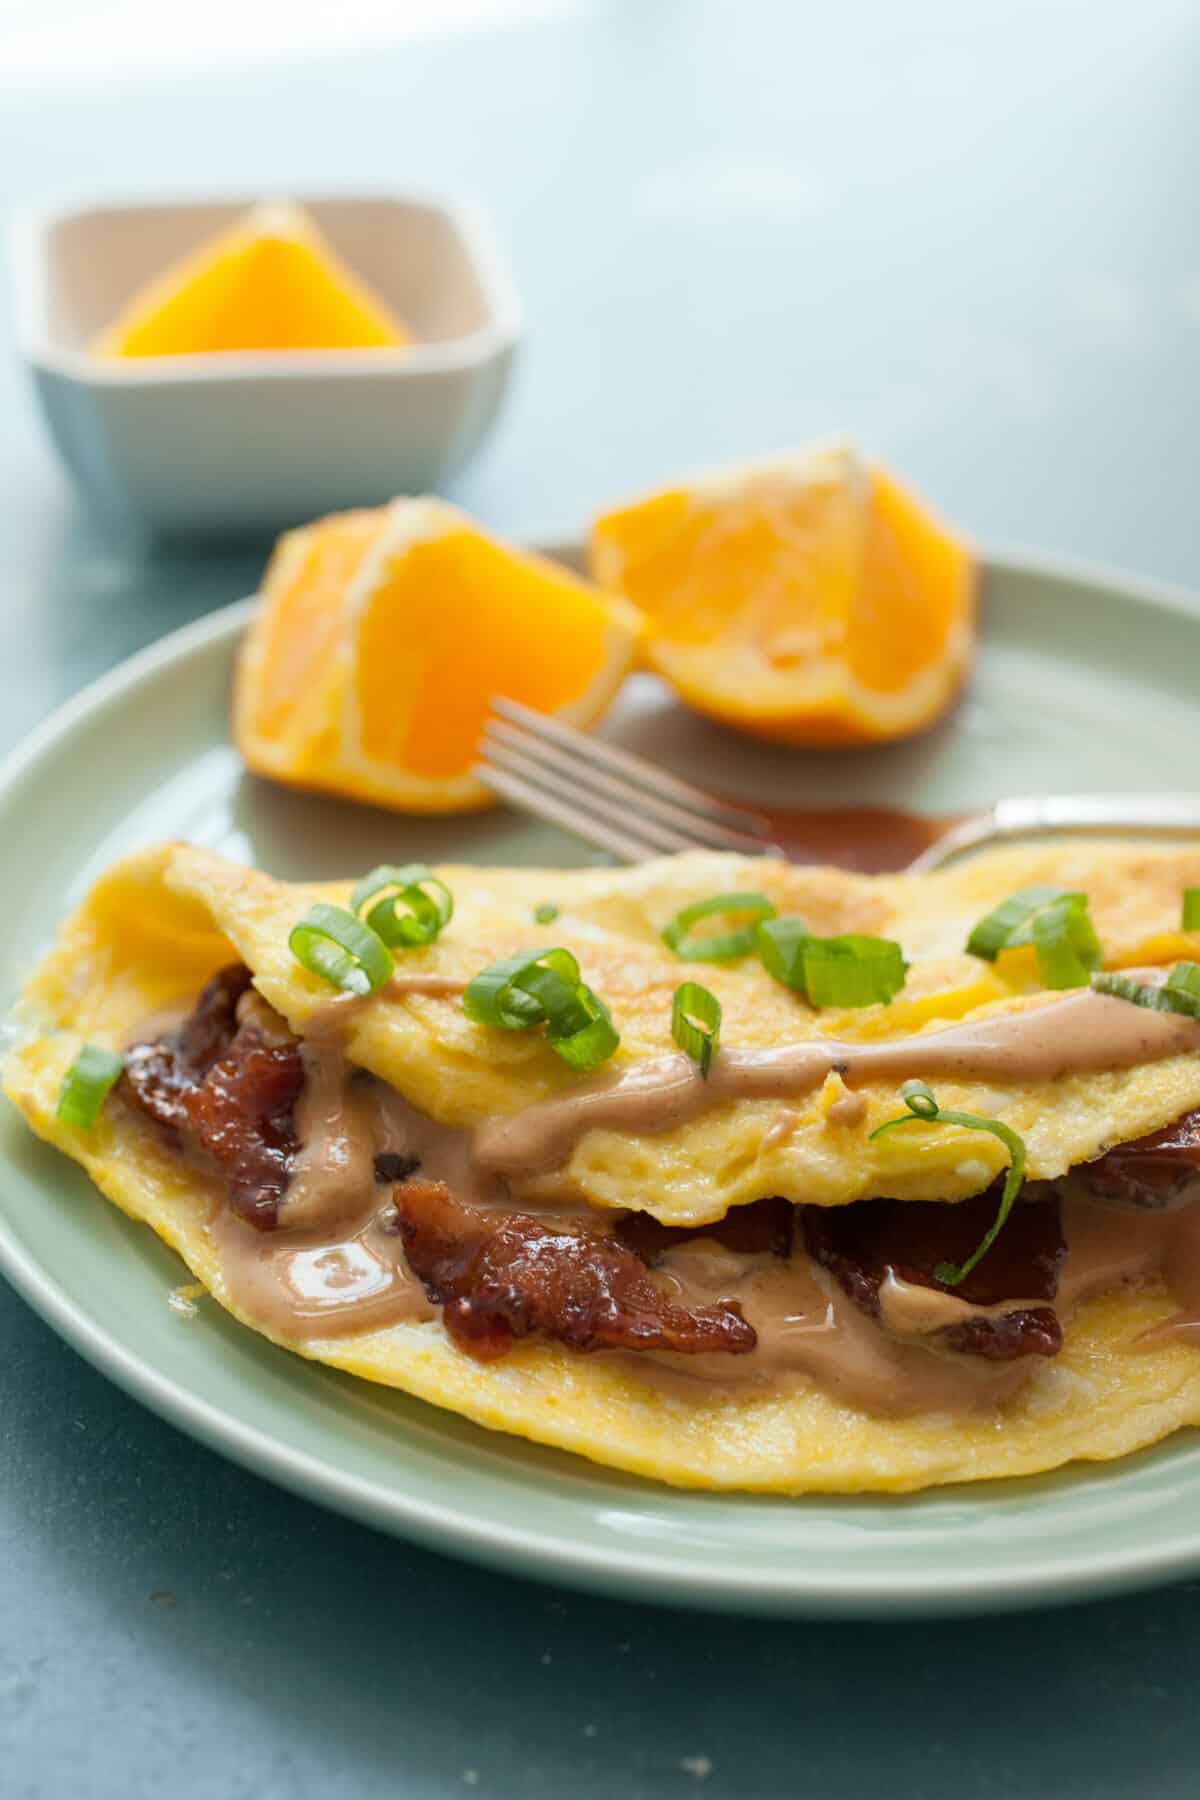 Peanut Butter Omelet with Candied Bacon: This might sound crazy, but with a few tips and tricks this omelet is ridiculously delicious. The key is some perfectly candied bacon! You gotta try this! | macheesmo.com